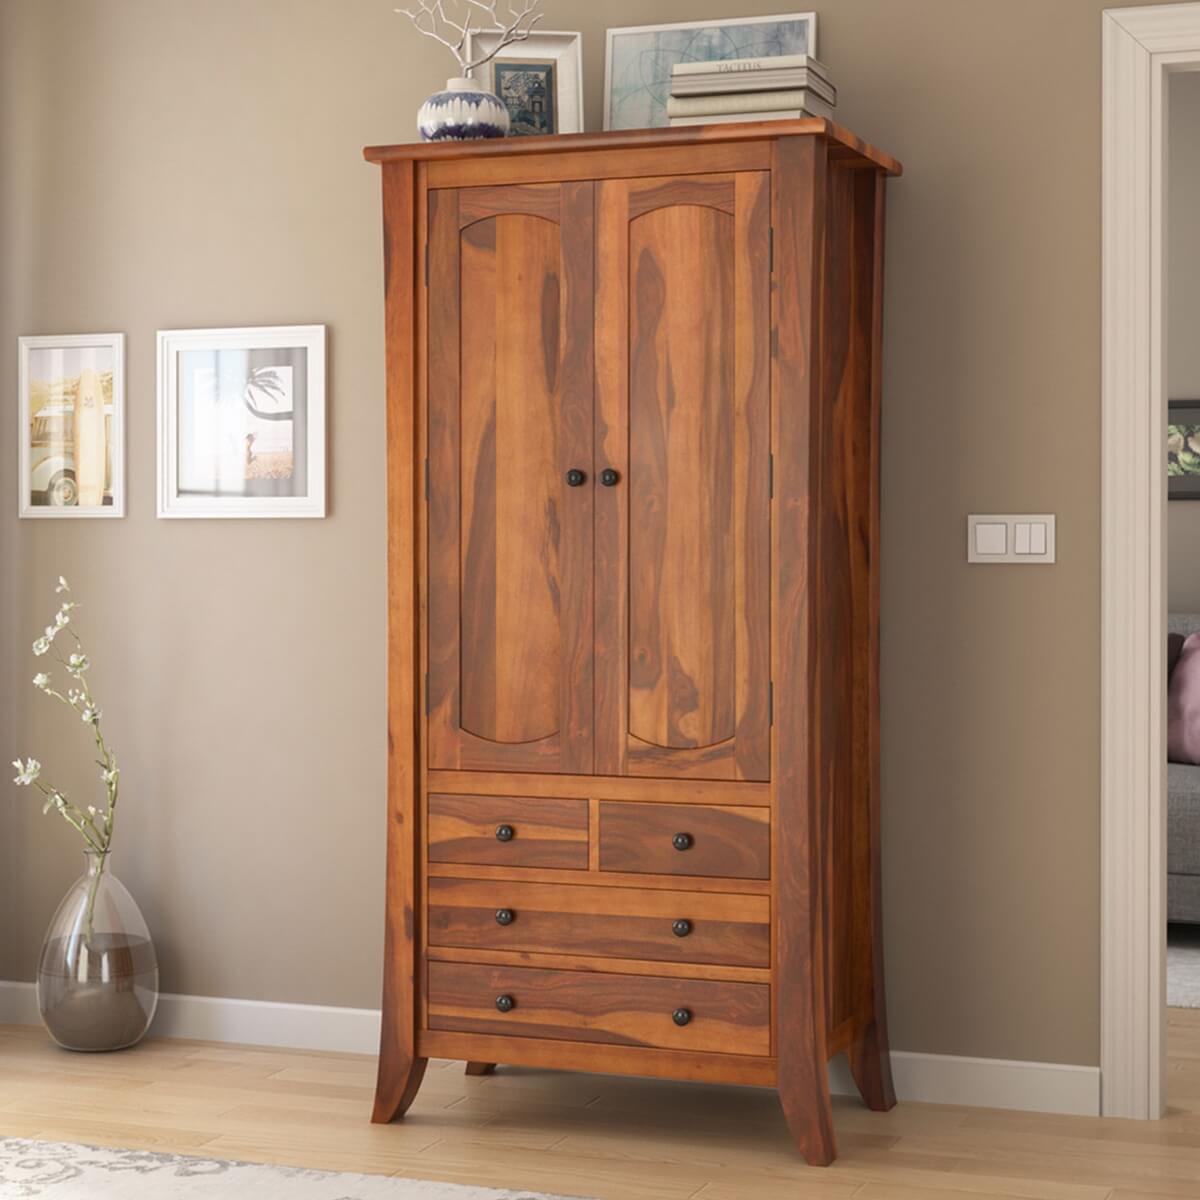 https://www.sierralivingconcepts.com/images/thumbs/0402842_georgia-modern-solid-wood-wardrobe-clothing-armoire-closet-with-4-drawers.jpeg